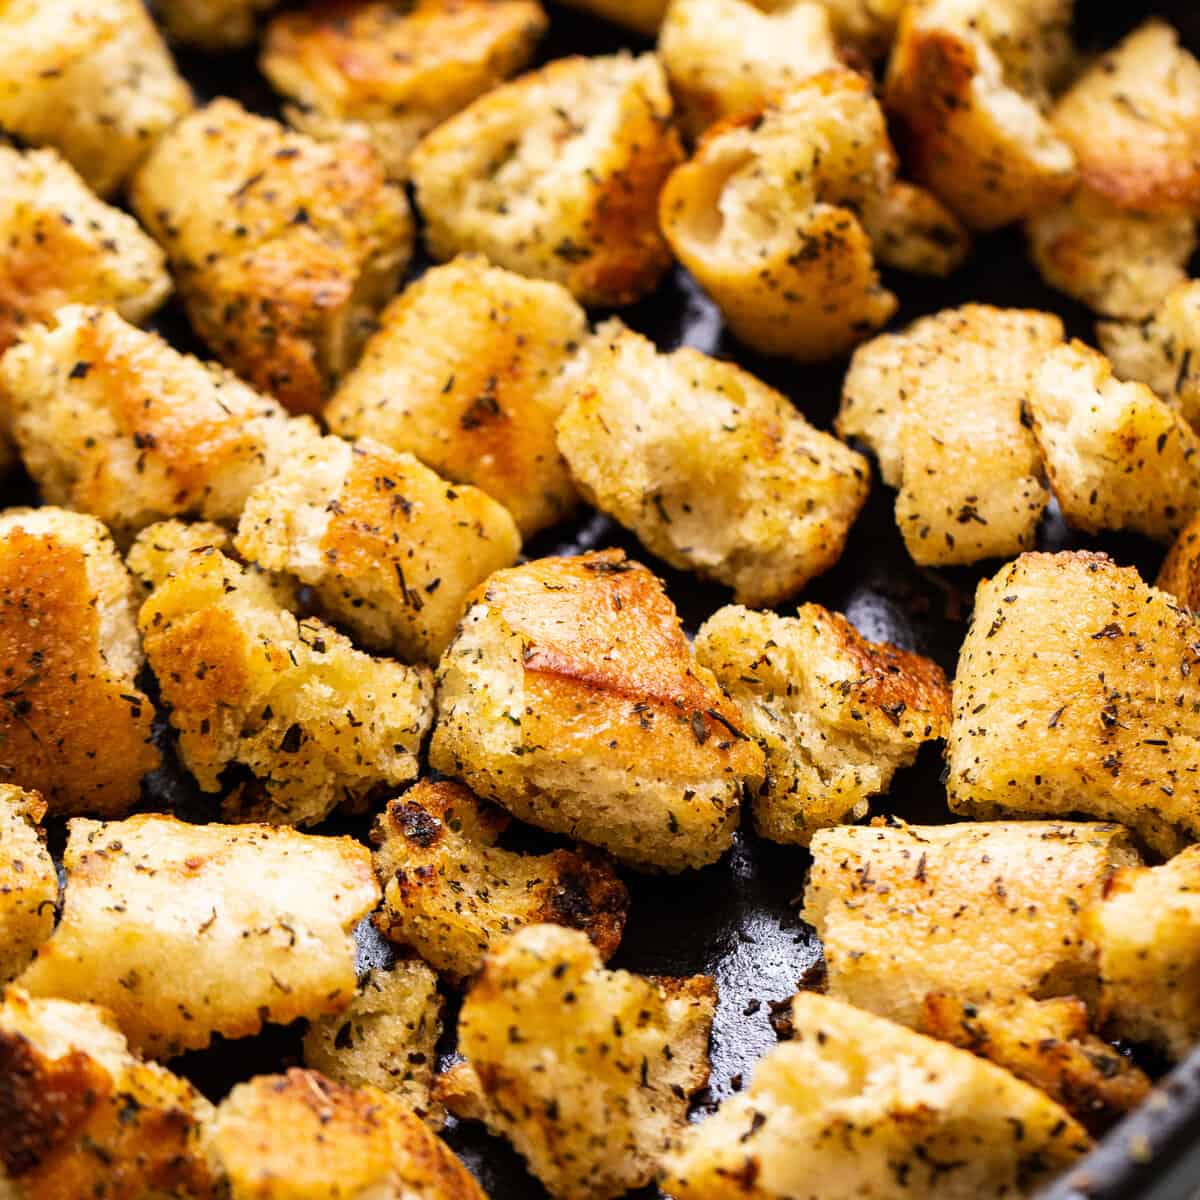 Best Homemade Croutons (pan-fried!) - Fit Foodie Finds